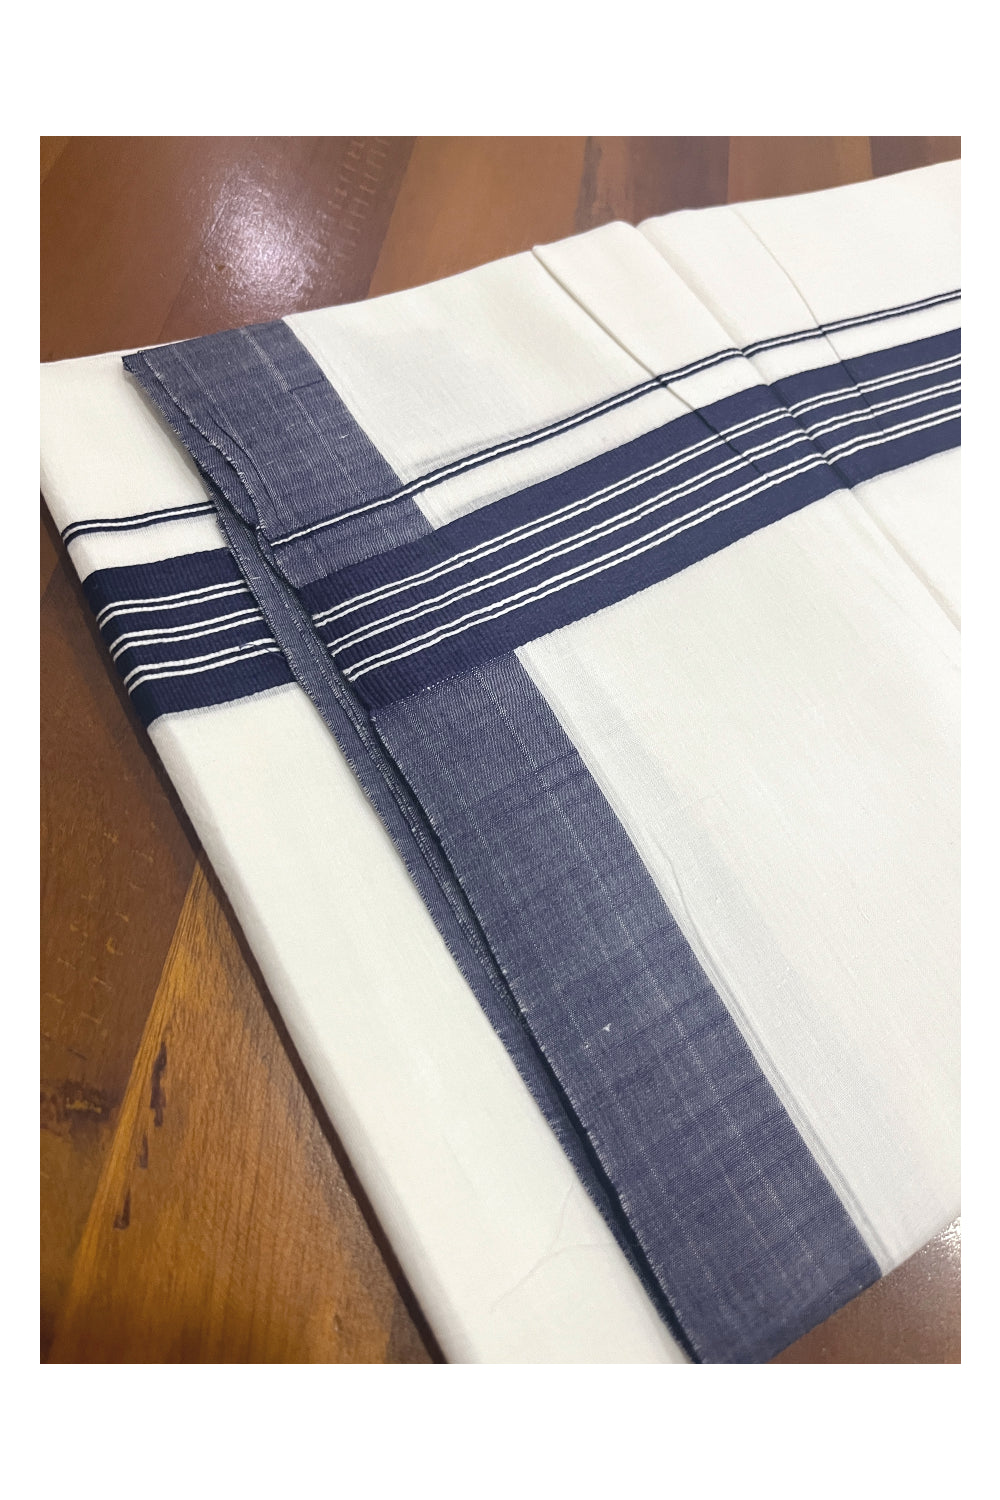 Pure White Cotton Double Mundu with Navy Blue Lines Border (South Indian Kerala Dhoti)